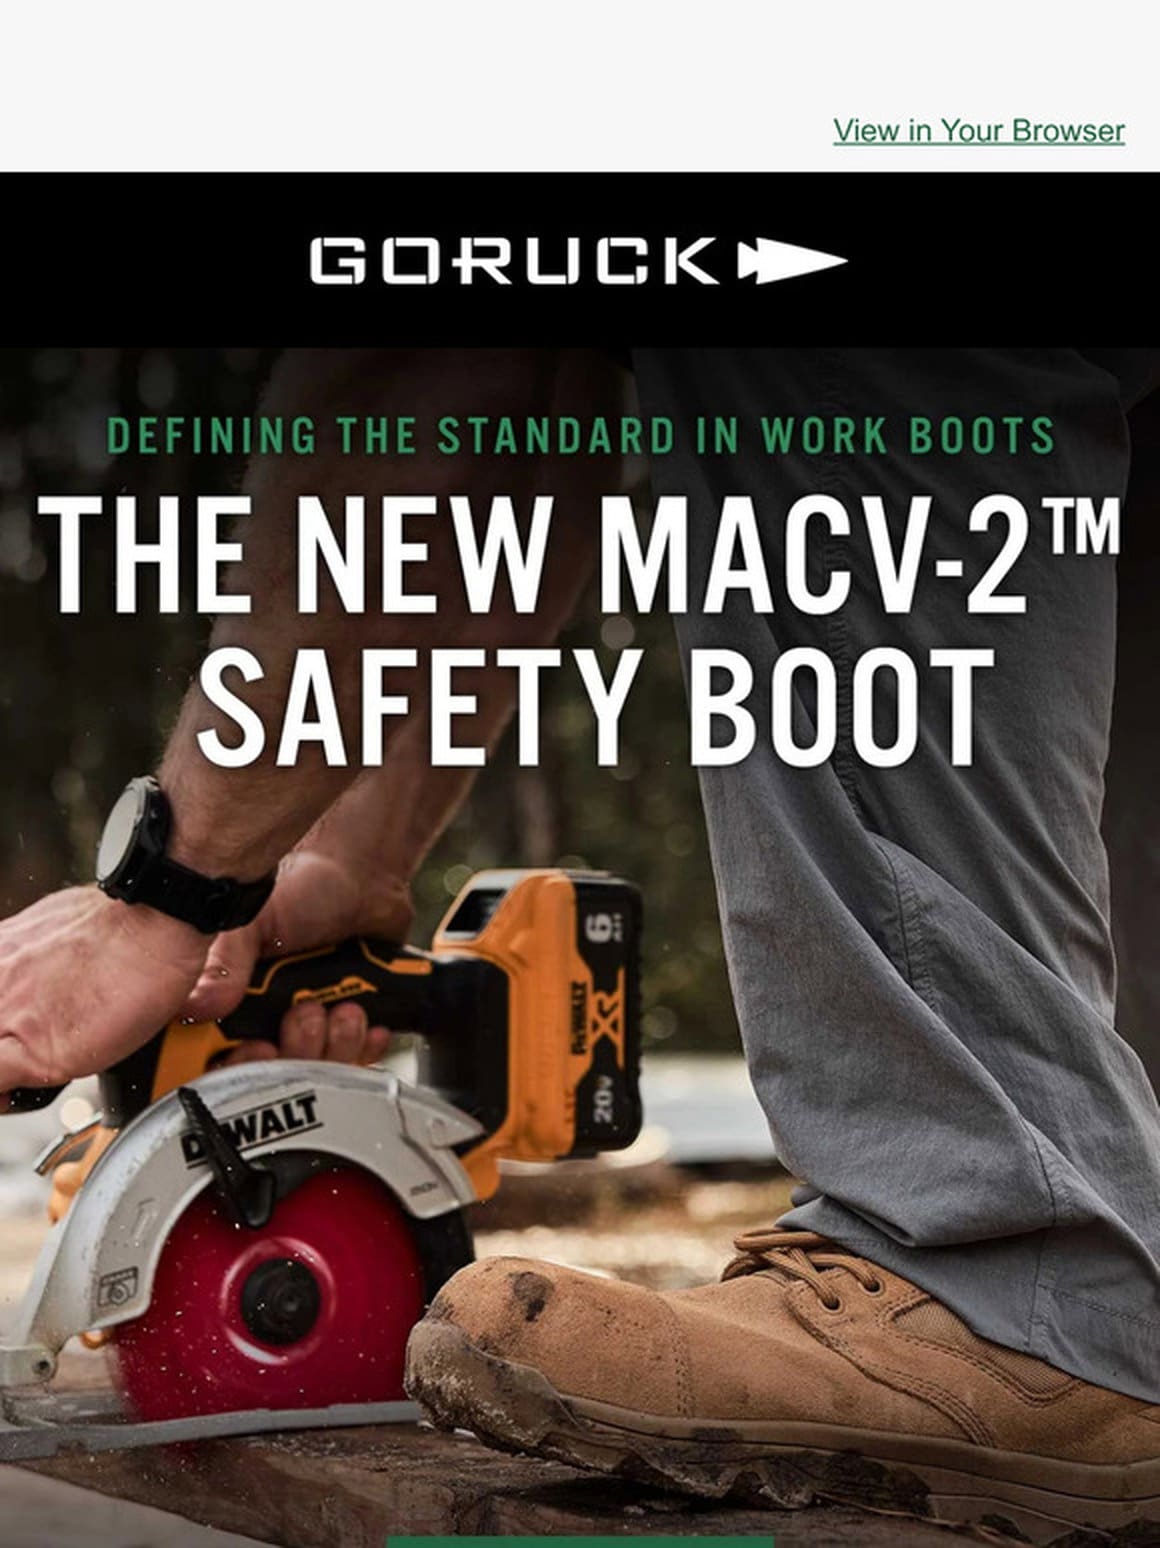 Defining the Standard In Work Boots: The NEW MACV-2 Safety Boot